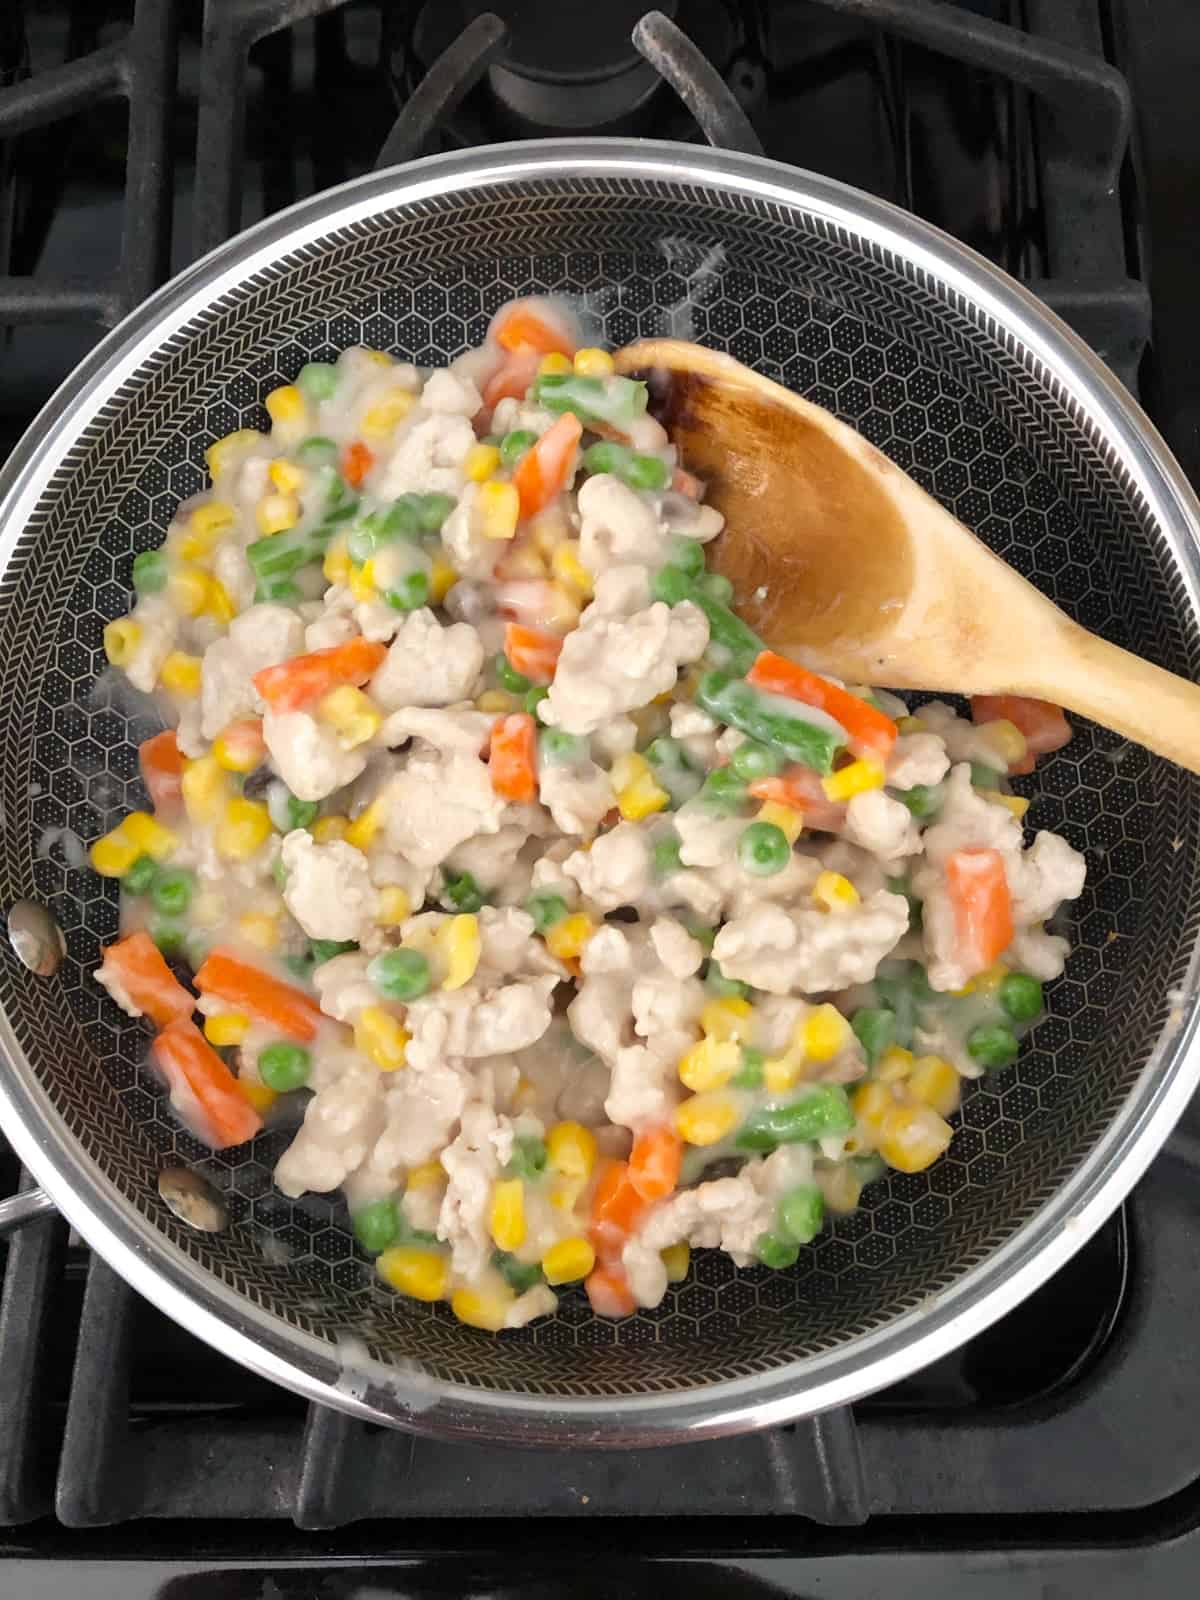 Cooking ground turkey, mixed vegetables in cream of mushroom soup in skillet.